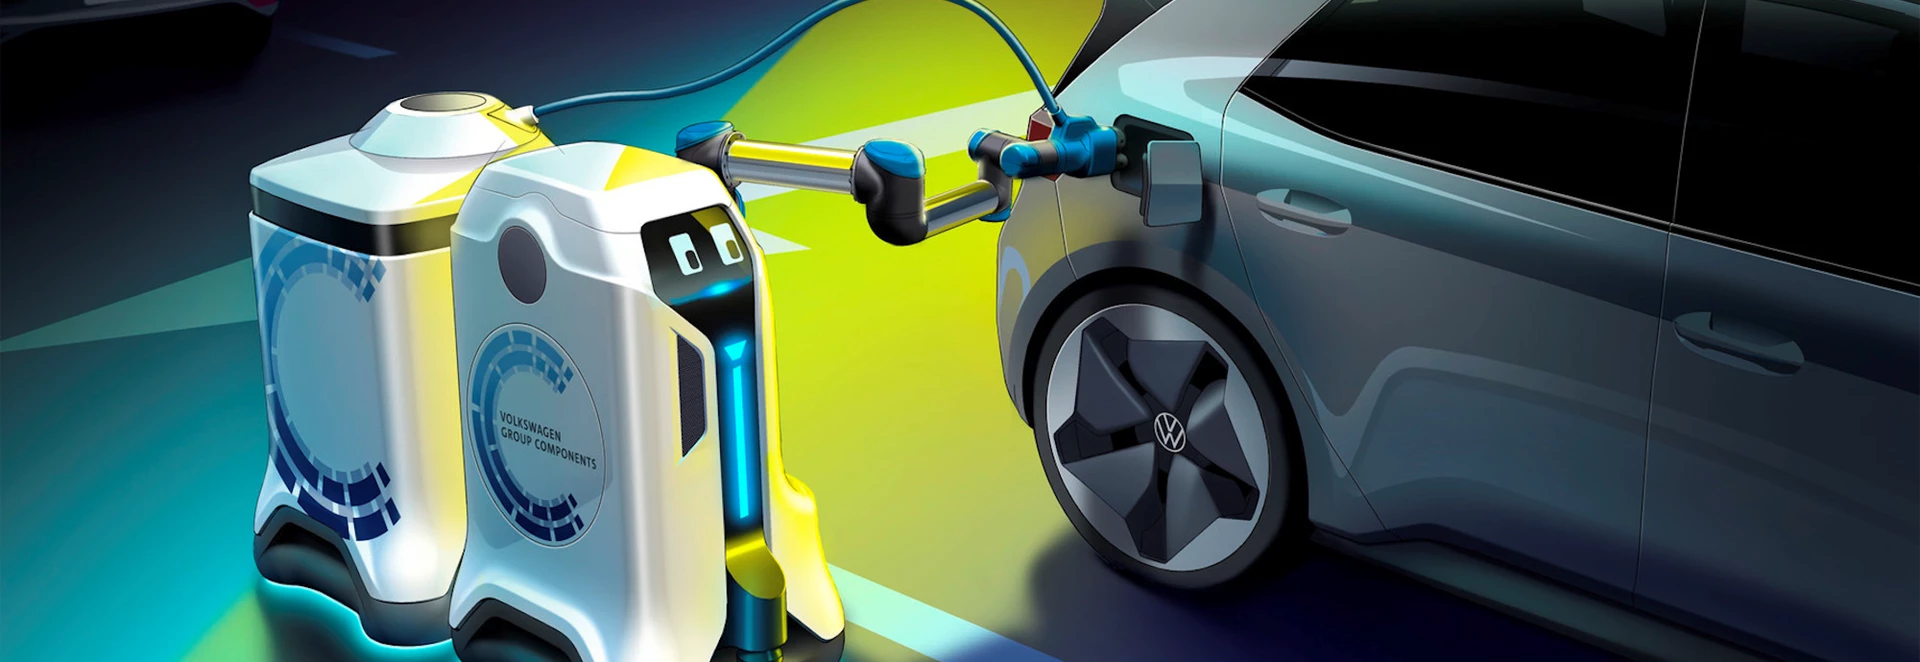 Could robots soon be charging your electric vehicle? Volkswagen thinks so…